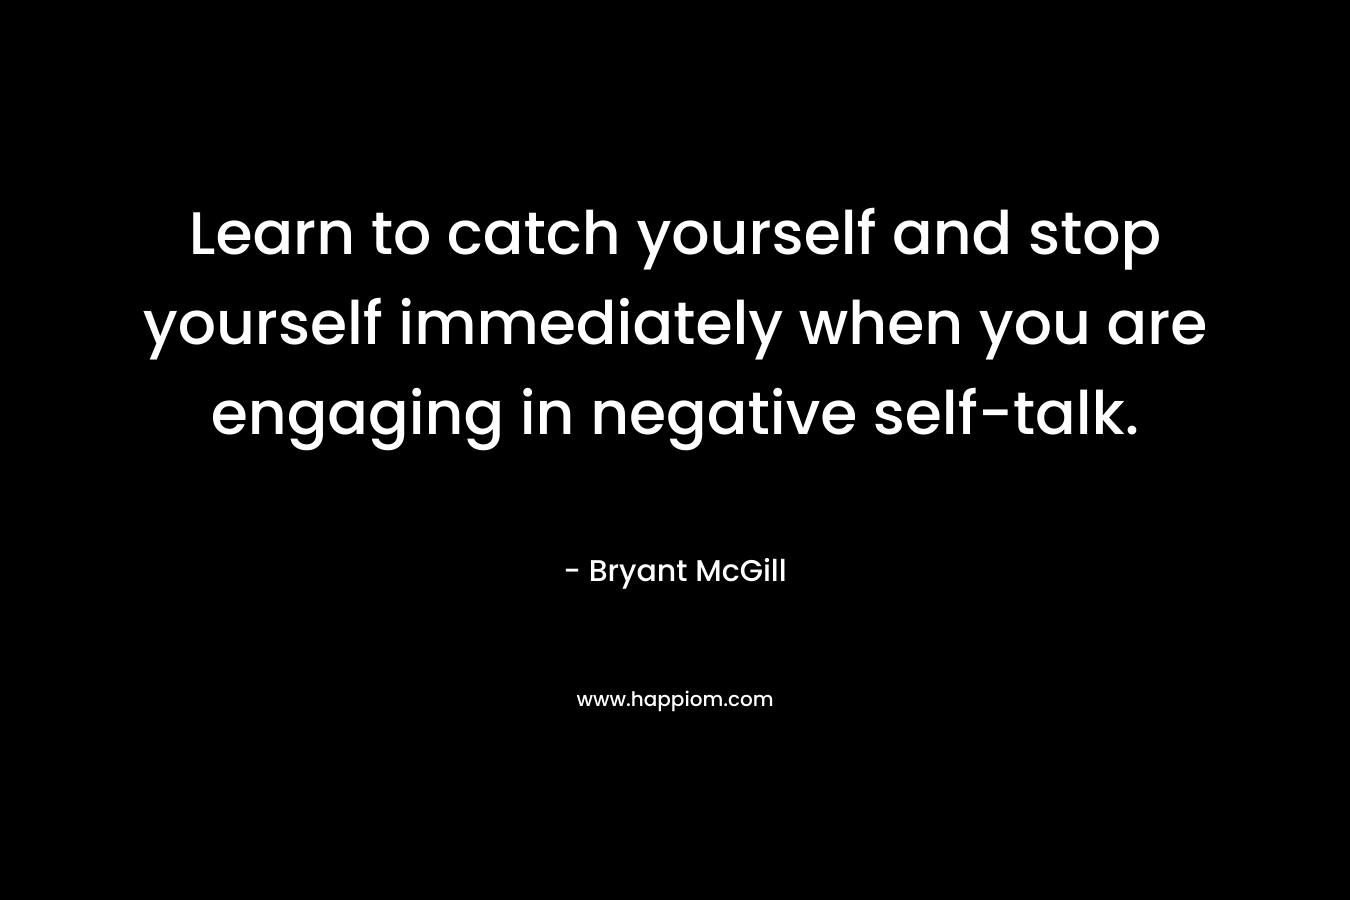 Learn to catch yourself and stop yourself immediately when you are engaging in negative self-talk. – Bryant McGill